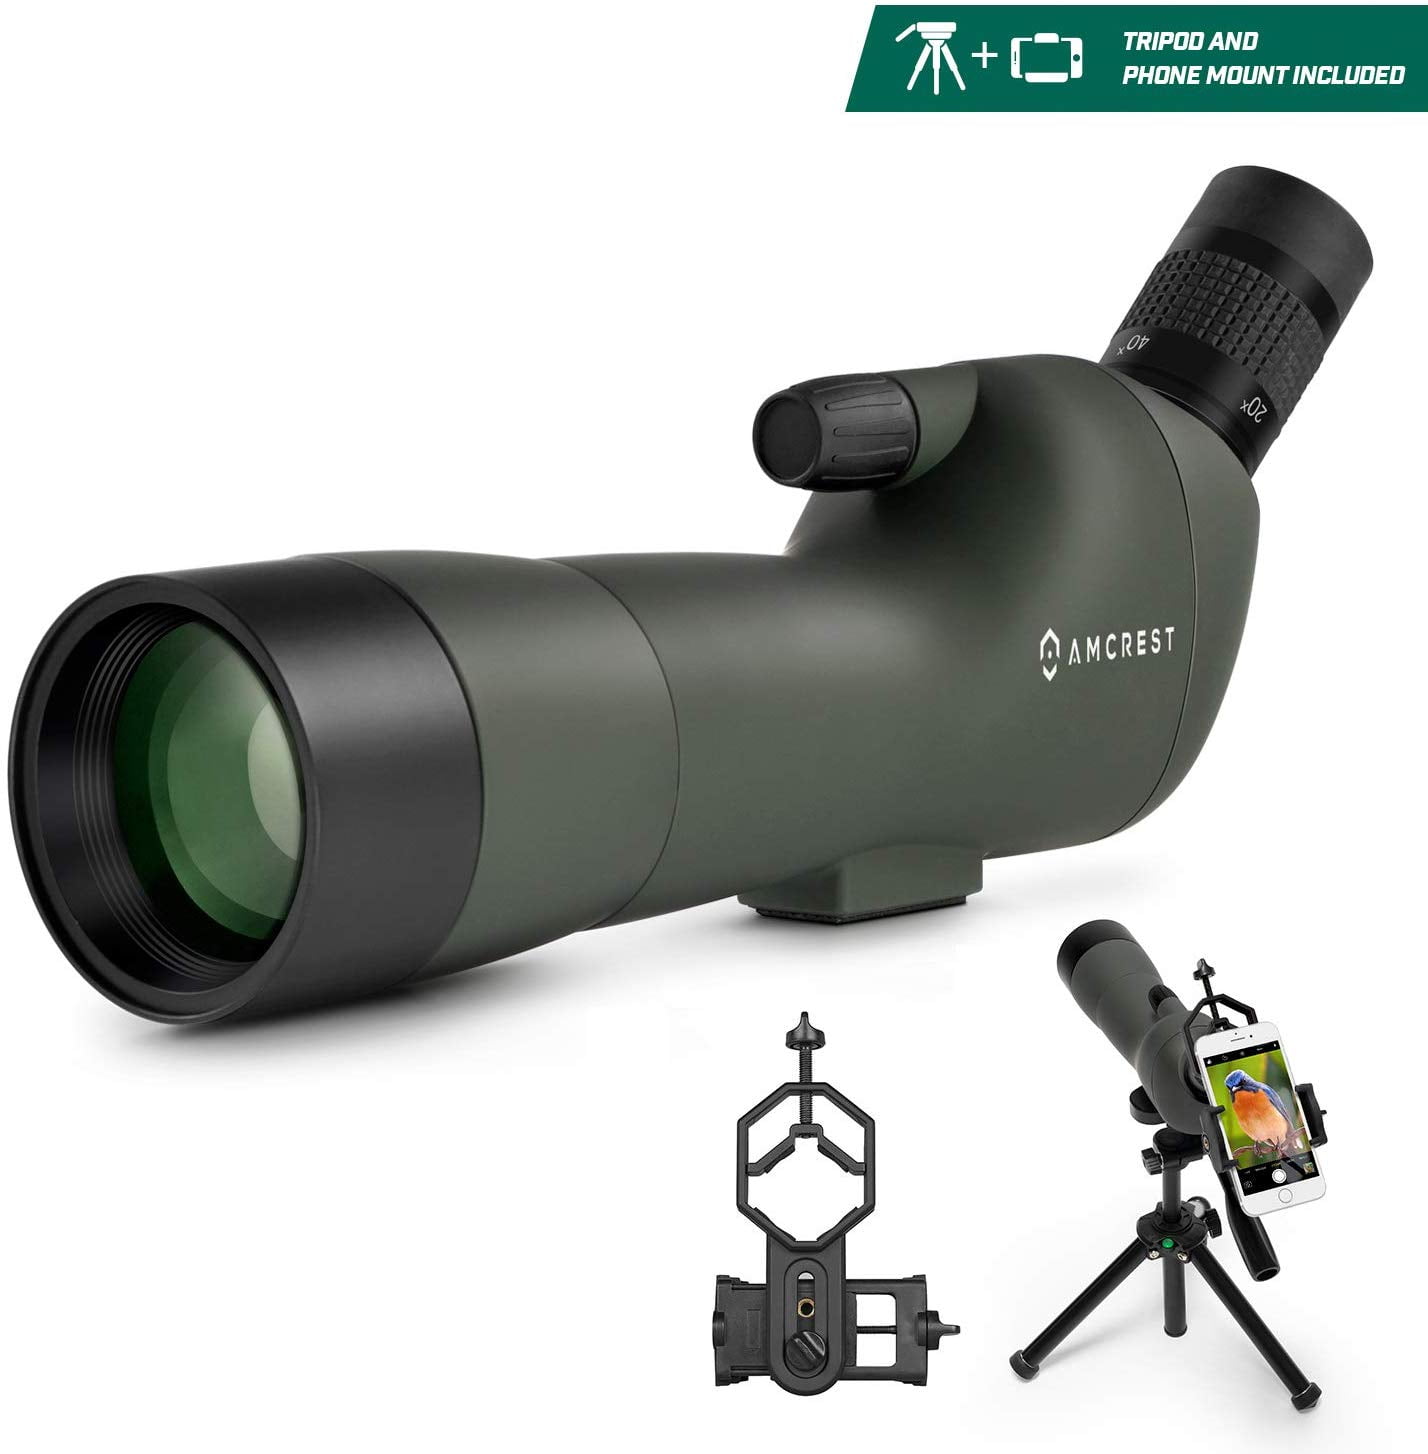 20-60x60mm Spotting Scope Night Vision with WiFi and APP Function,Night Vision Goggles with External Powerful Infrared Lamp for Shooting Practice,Wildlife Watching,Night Watching 